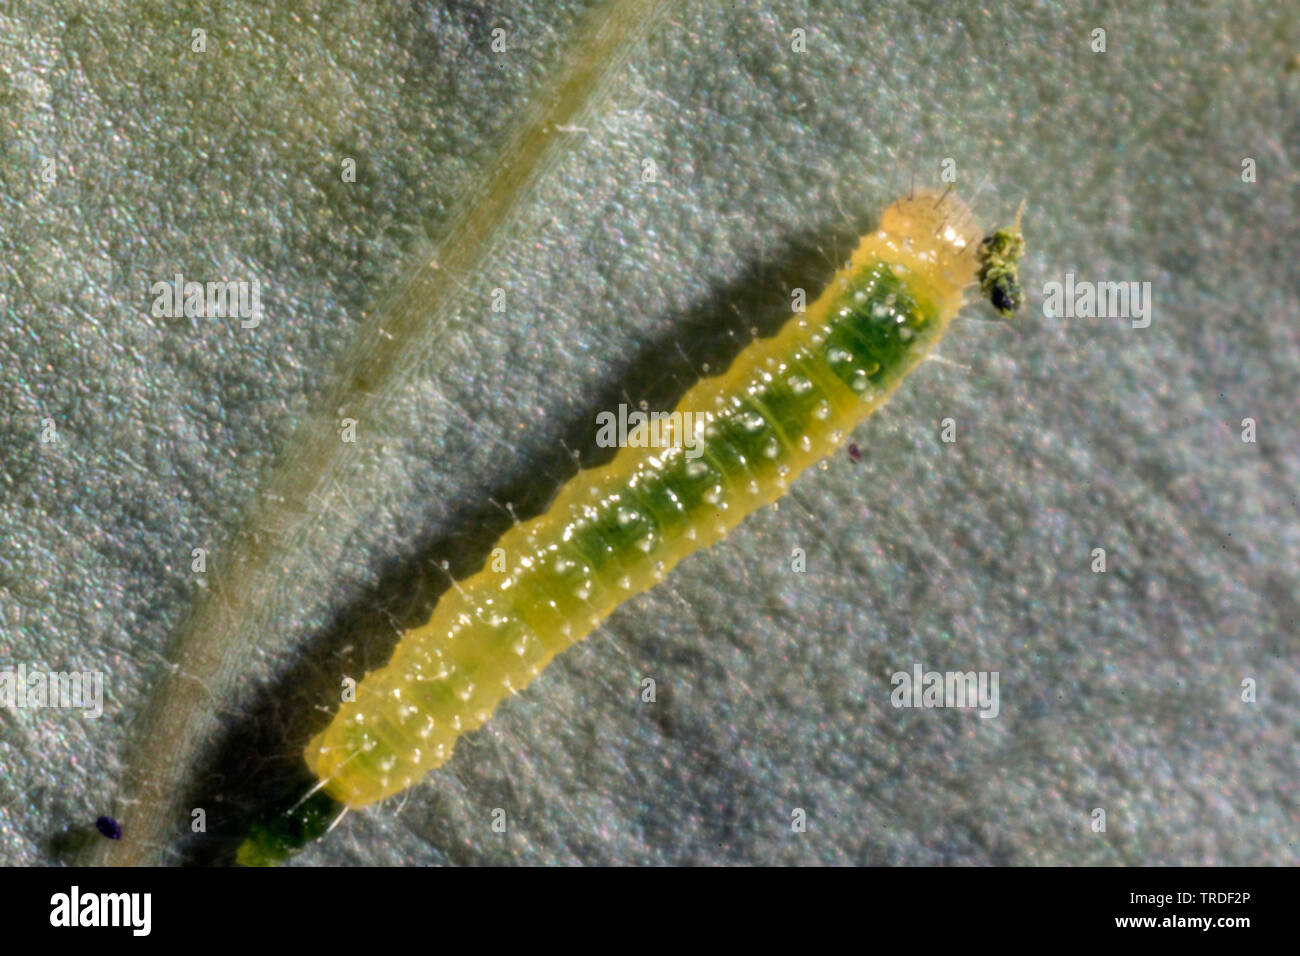 Small white, Cabbage butterfly, Imported cabbageworm (Pieris rapae, Artogeia rapae), caterpillar just after hatching on a kohlrabi leaf, Germany, Bavaria Stock Photo